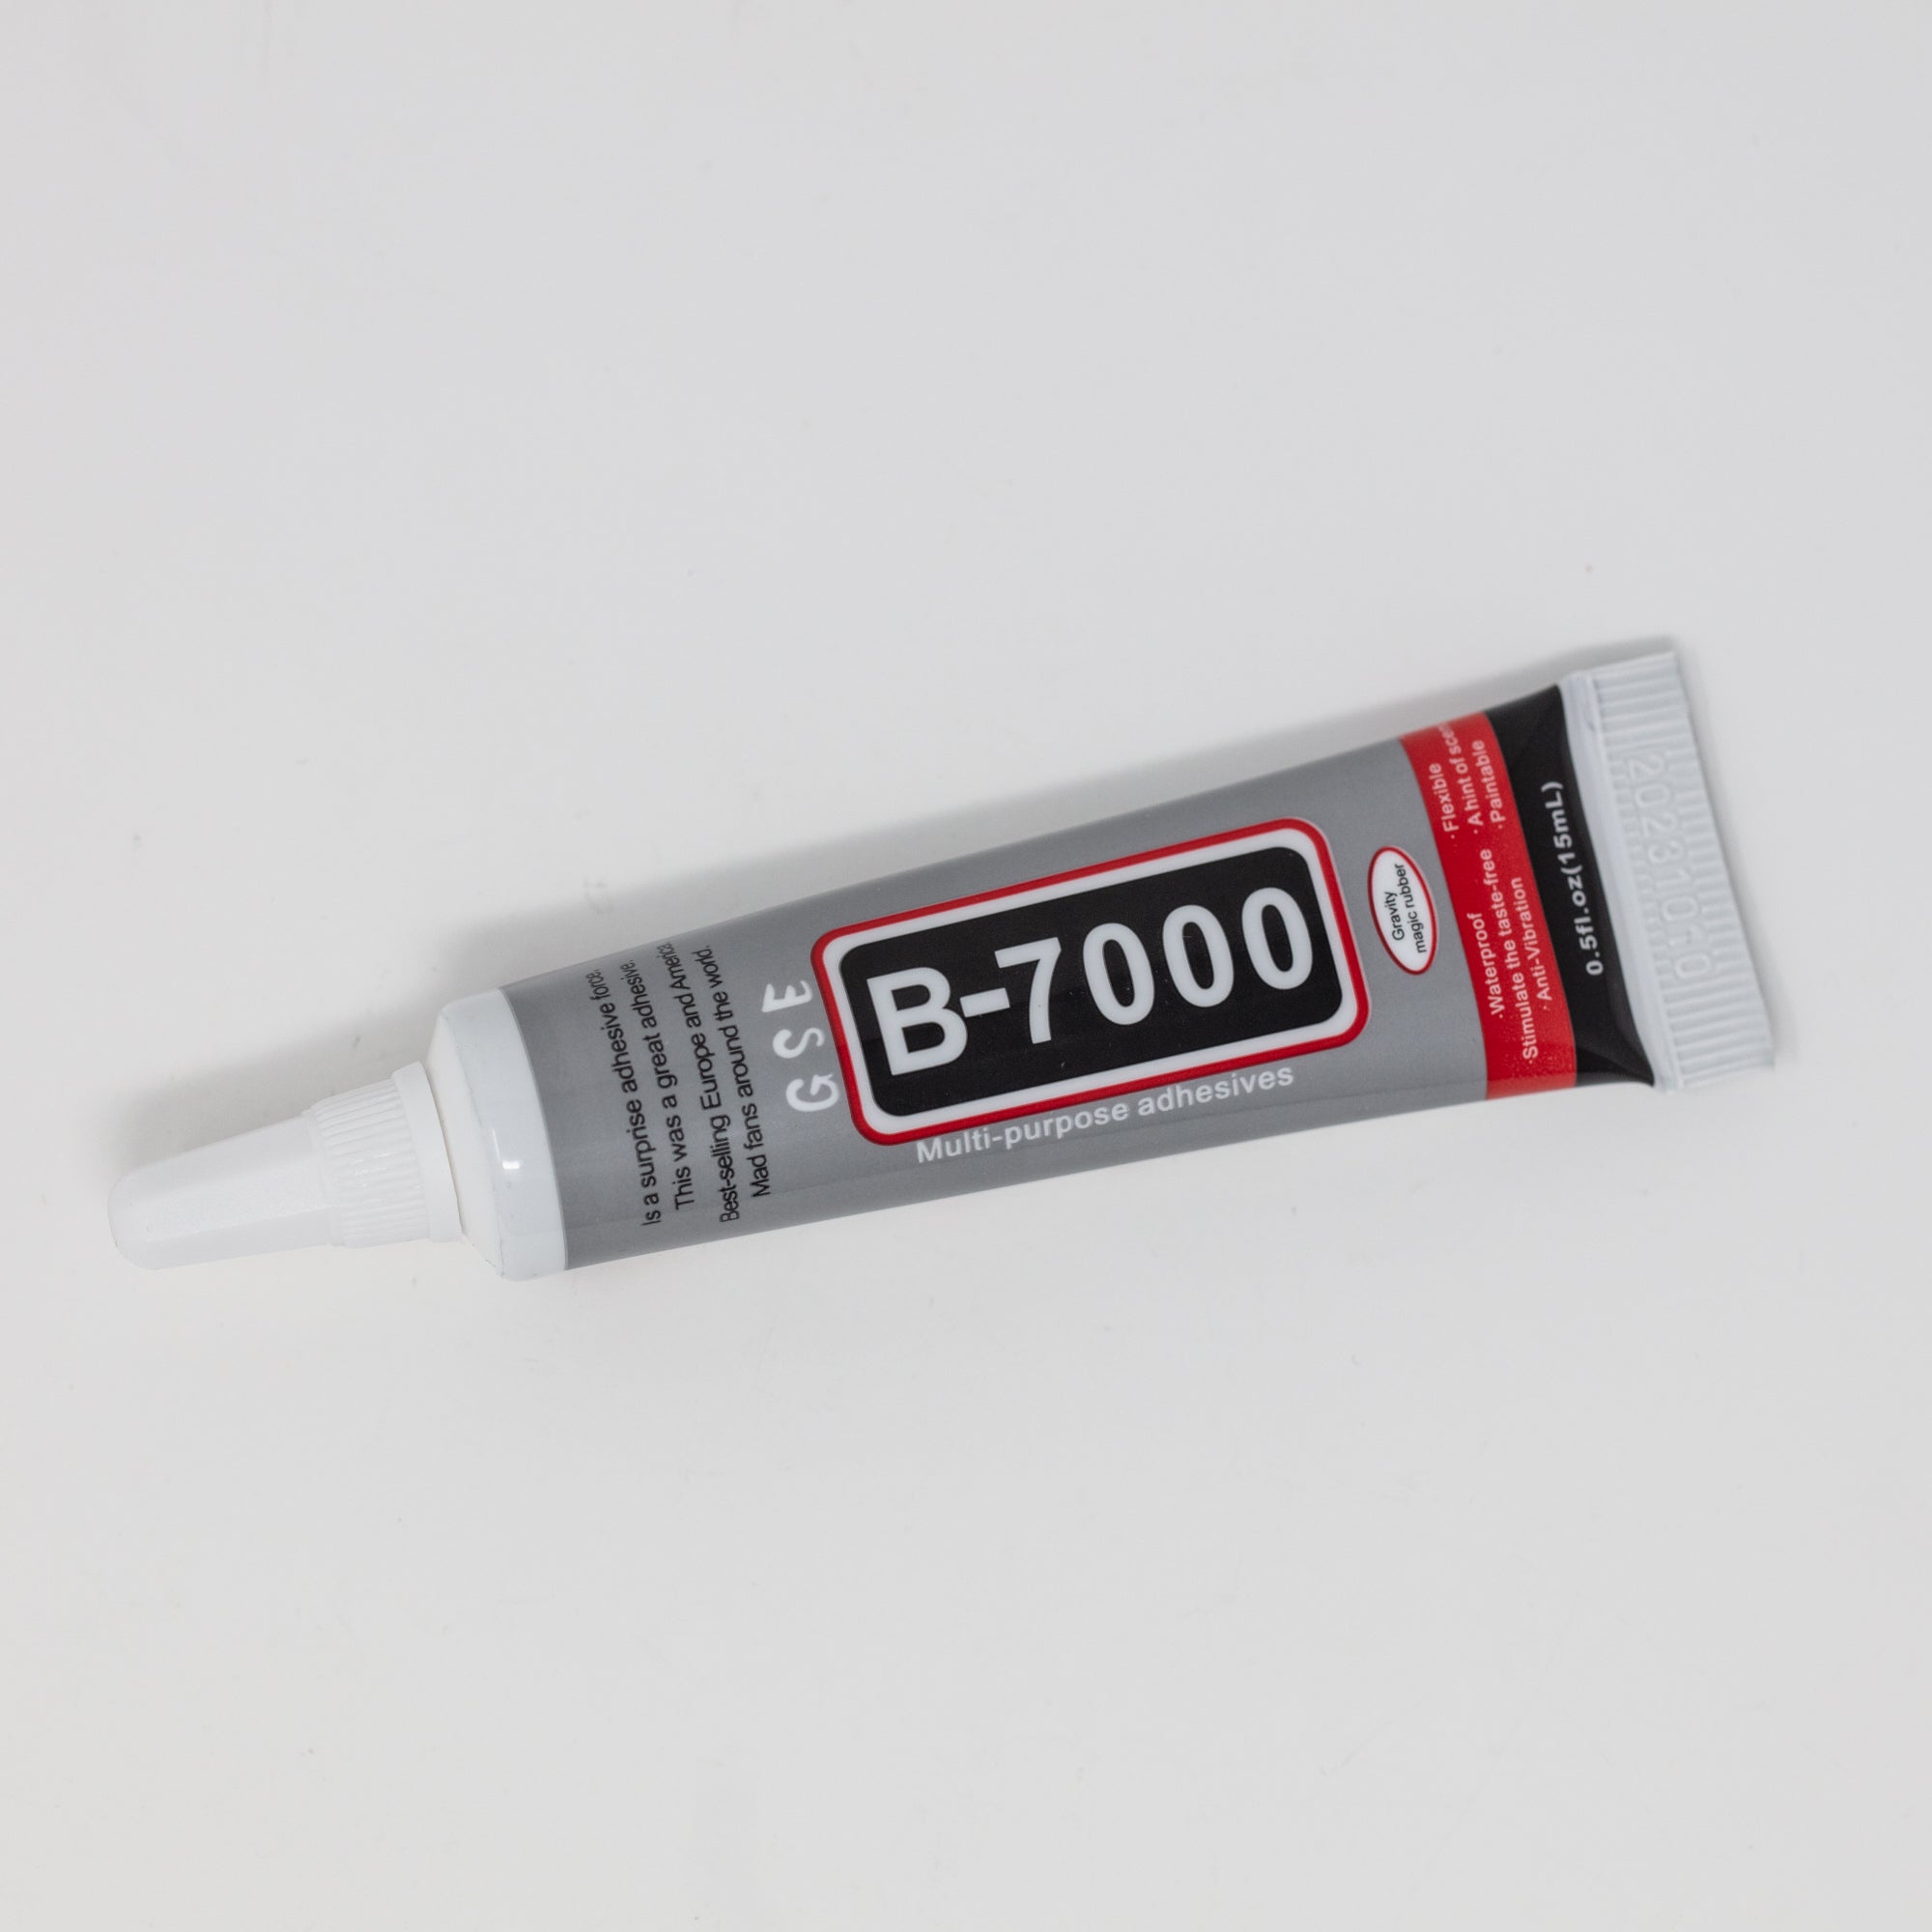 B-7000 Glue Clear for Rhinestone Crafts Review 